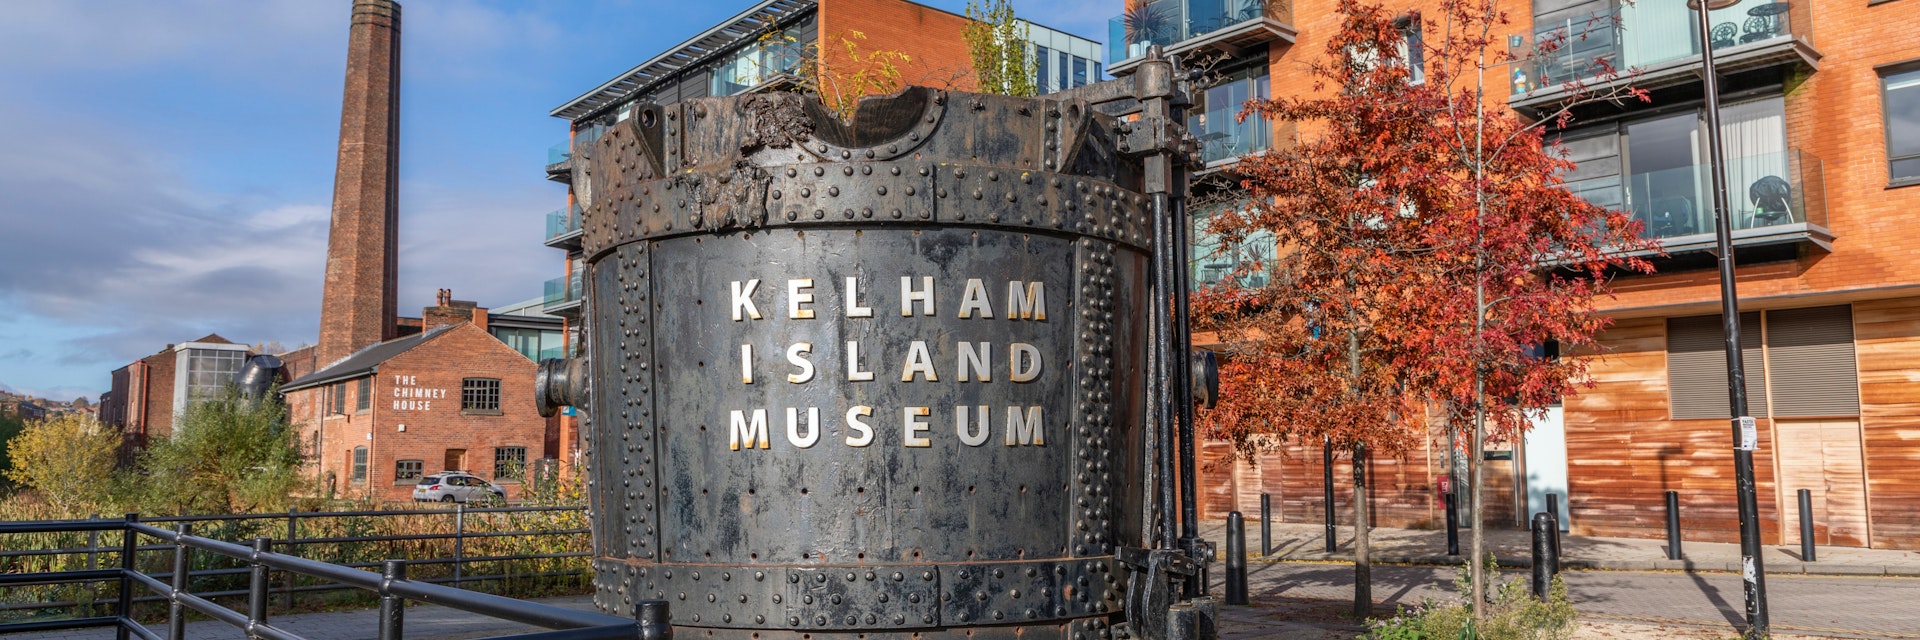 Sheffield, England, UK - November 10, 2019: Kelham Island Museum in Sheffield. Kelham Island Museum opened in 1982 to house the objects, pictures and archive material representing Sheffield`s industrial story.